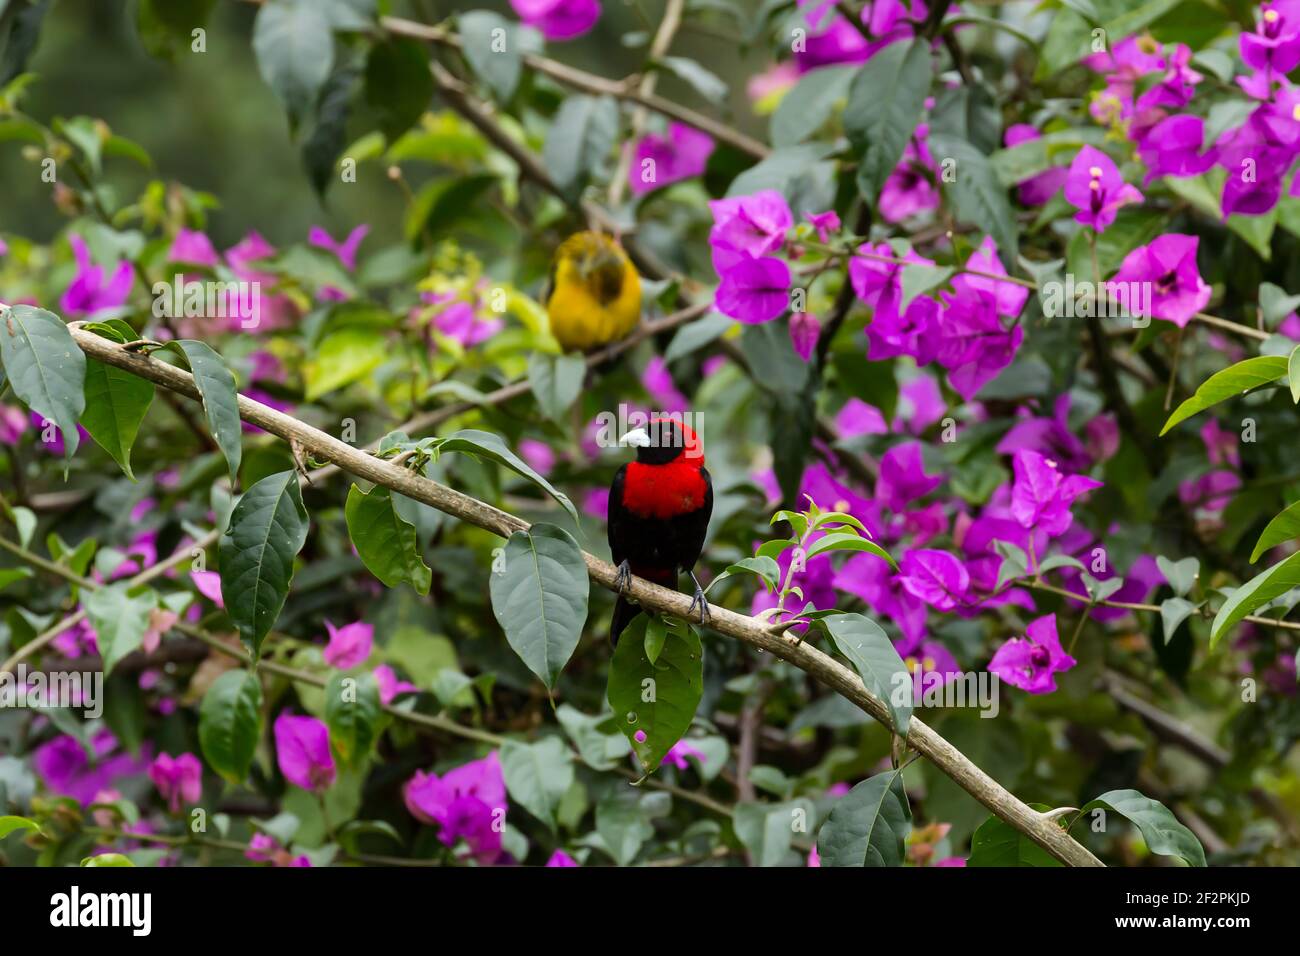 The Crimson-collared Tanager - Ramphocelus sanguinolentus, is found from southeast Mexico to Panama. Stock Photo